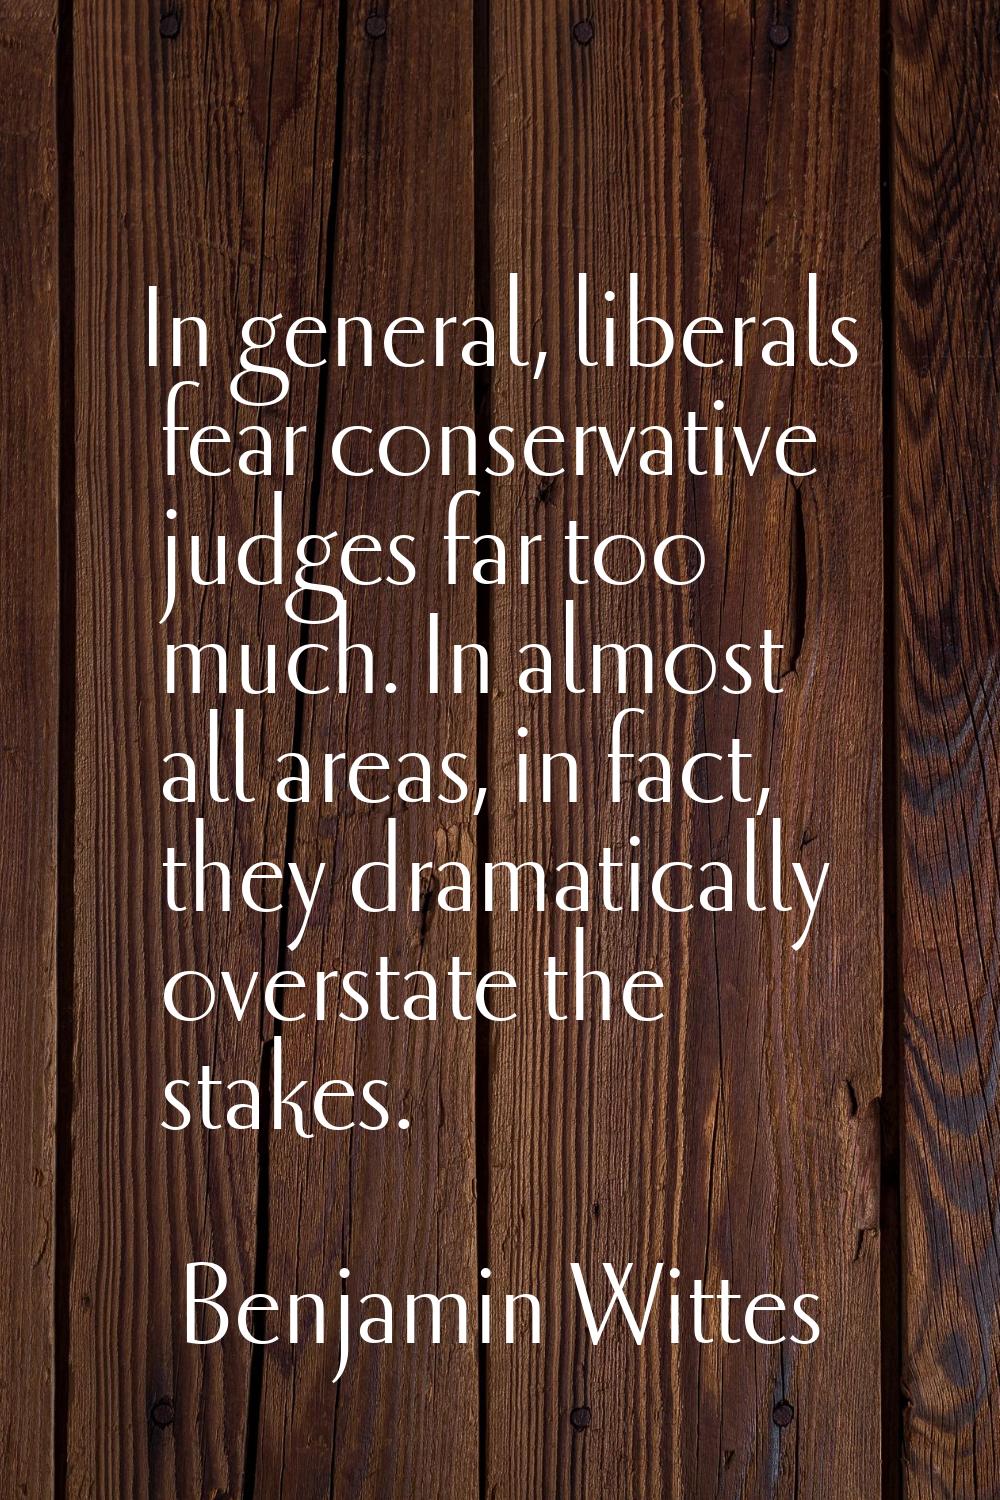 In general, liberals fear conservative judges far too much. In almost all areas, in fact, they dram